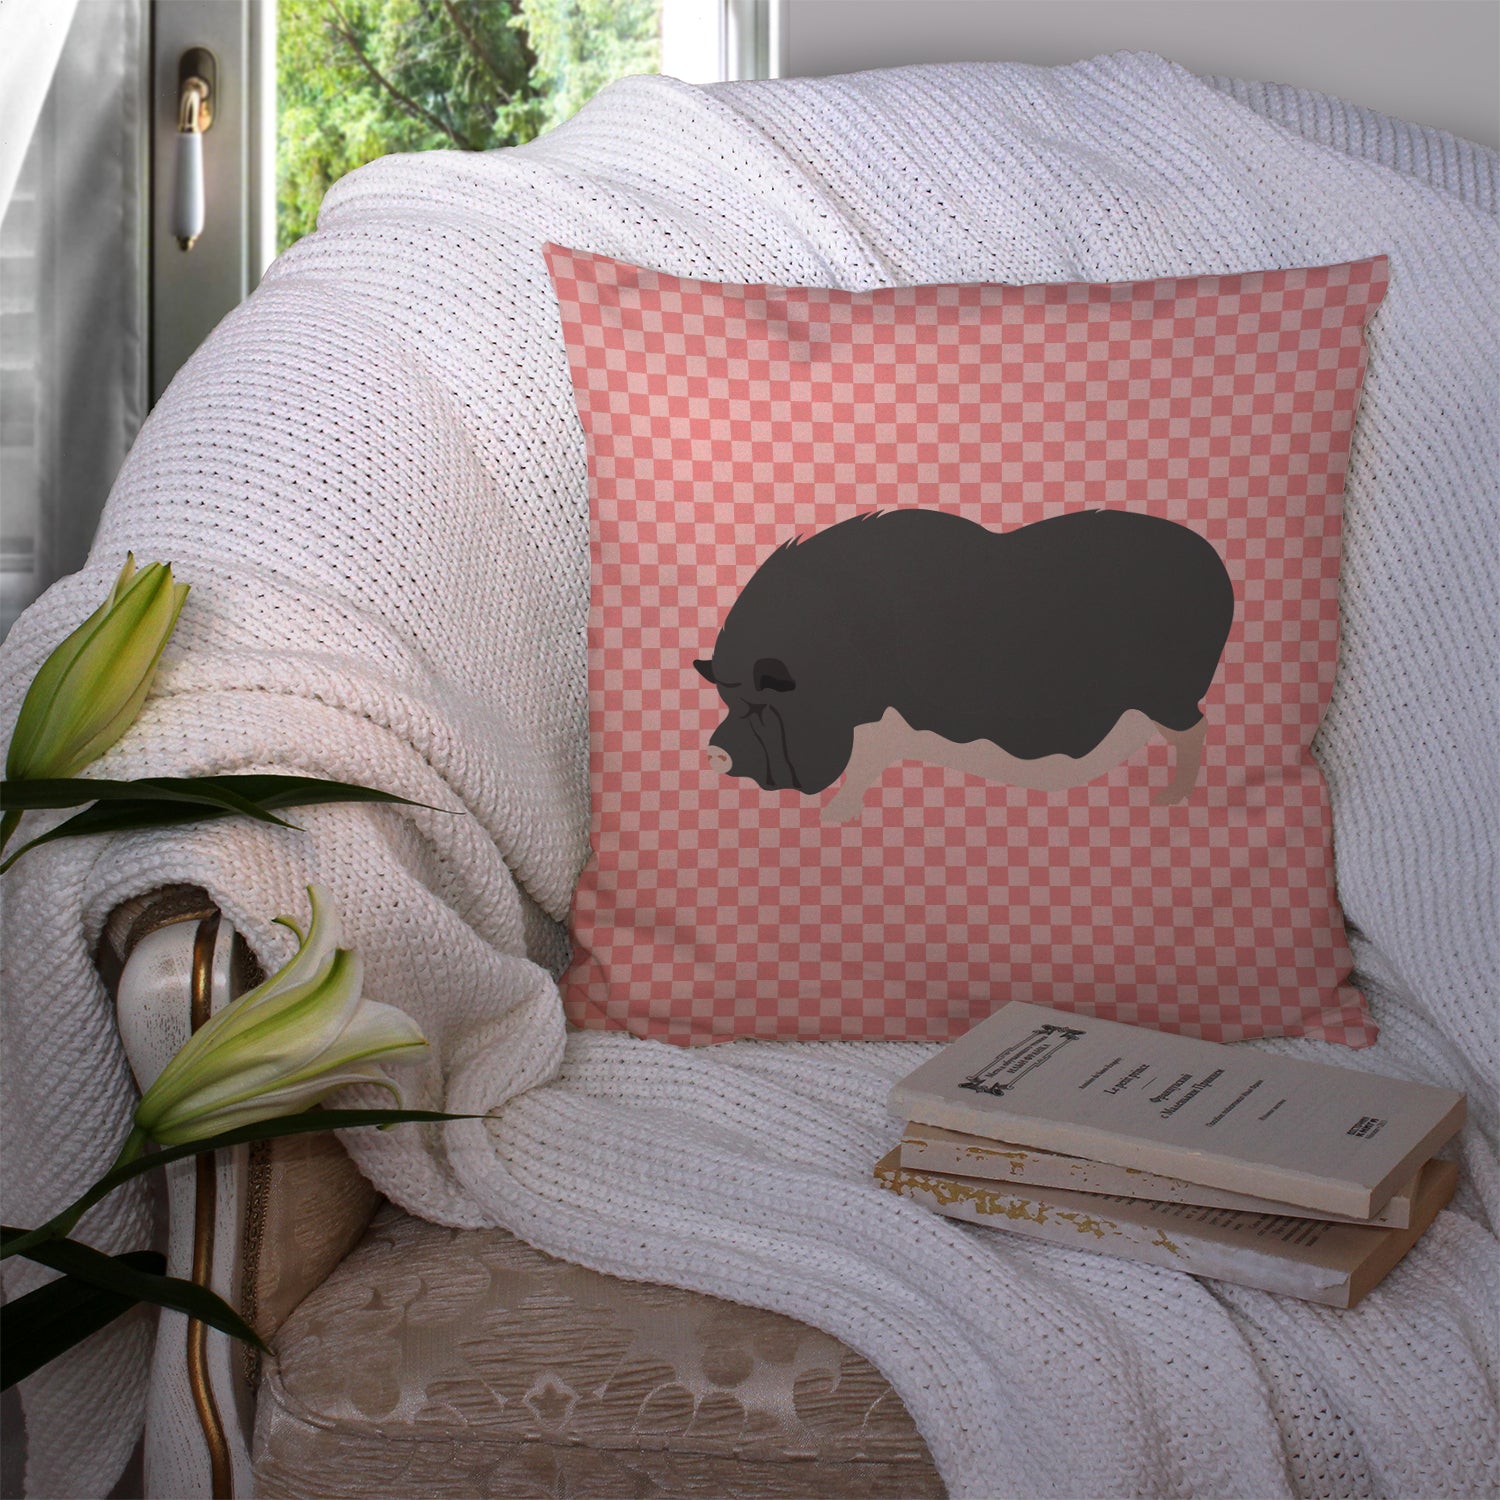 Vietnamese Pot-Bellied Pig Pink Check Fabric Decorative Pillow BB7941PW1414 - the-store.com